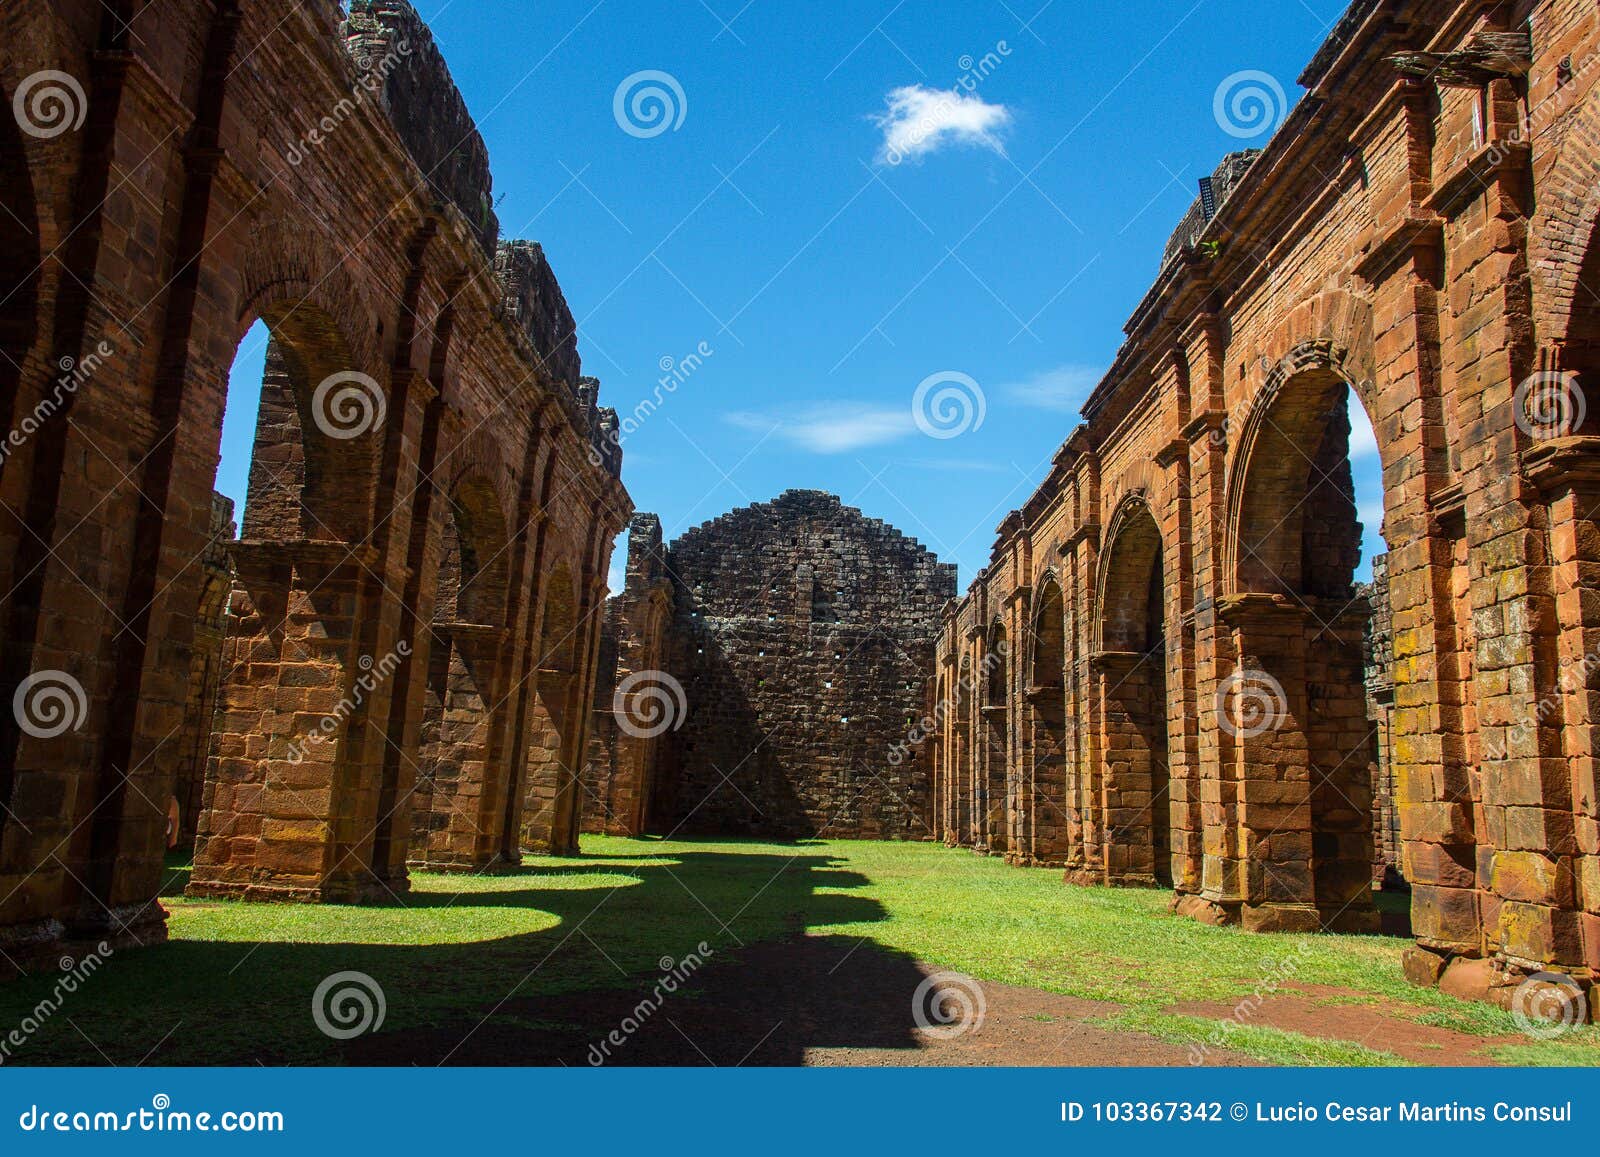 ruins of cathedral of sao miguel das missoes